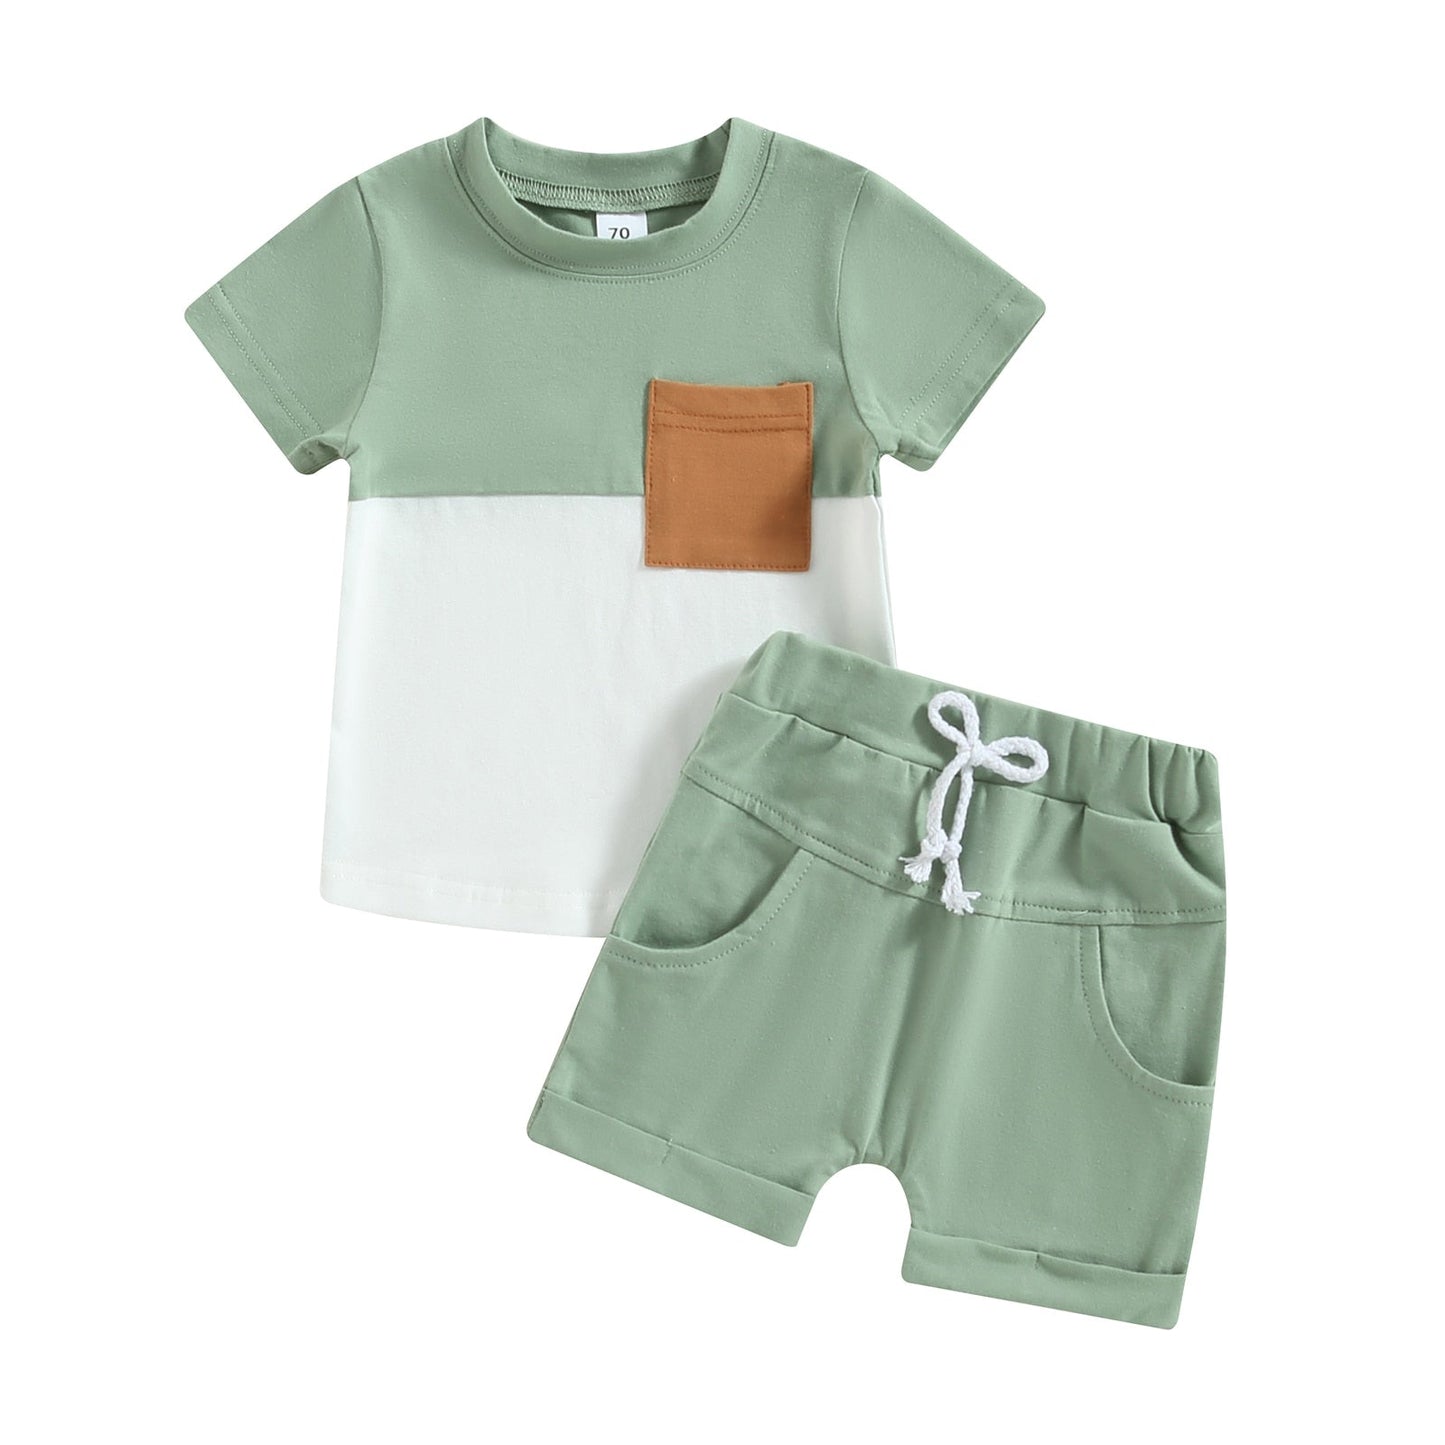 2 Pc Set: 0-3T Toddler Infant Baby Boy Color Block Tee and Shorts Summer Set